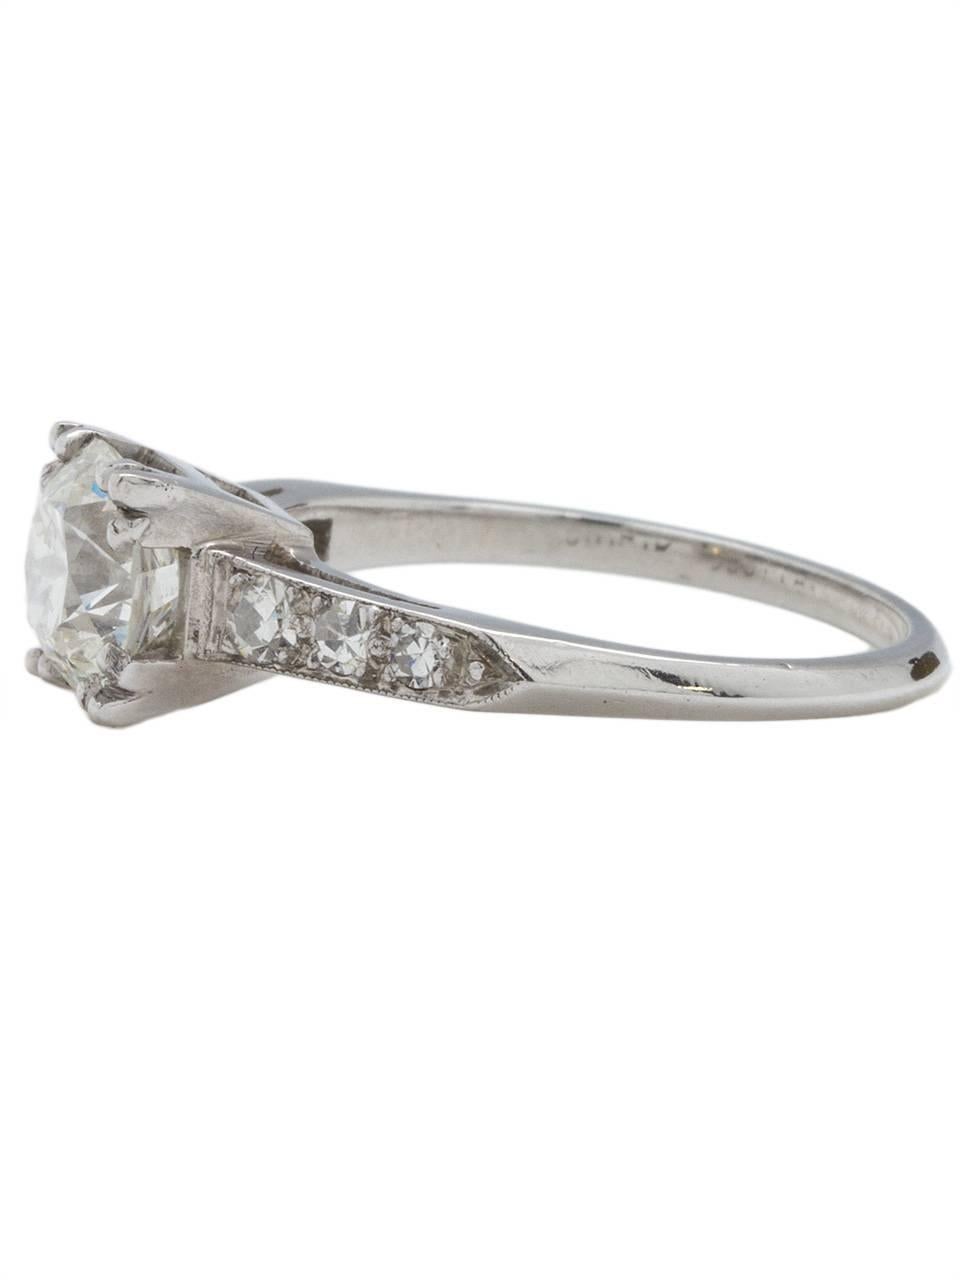 This beautiful 1940s platinum engagement ring showcases a bright and lively 1.27ct transitional Cut center diamond, H-VS1. An angular, simple channel set design is accented by six sizable single cut side diamonds, bead set with milgrain edge. Open